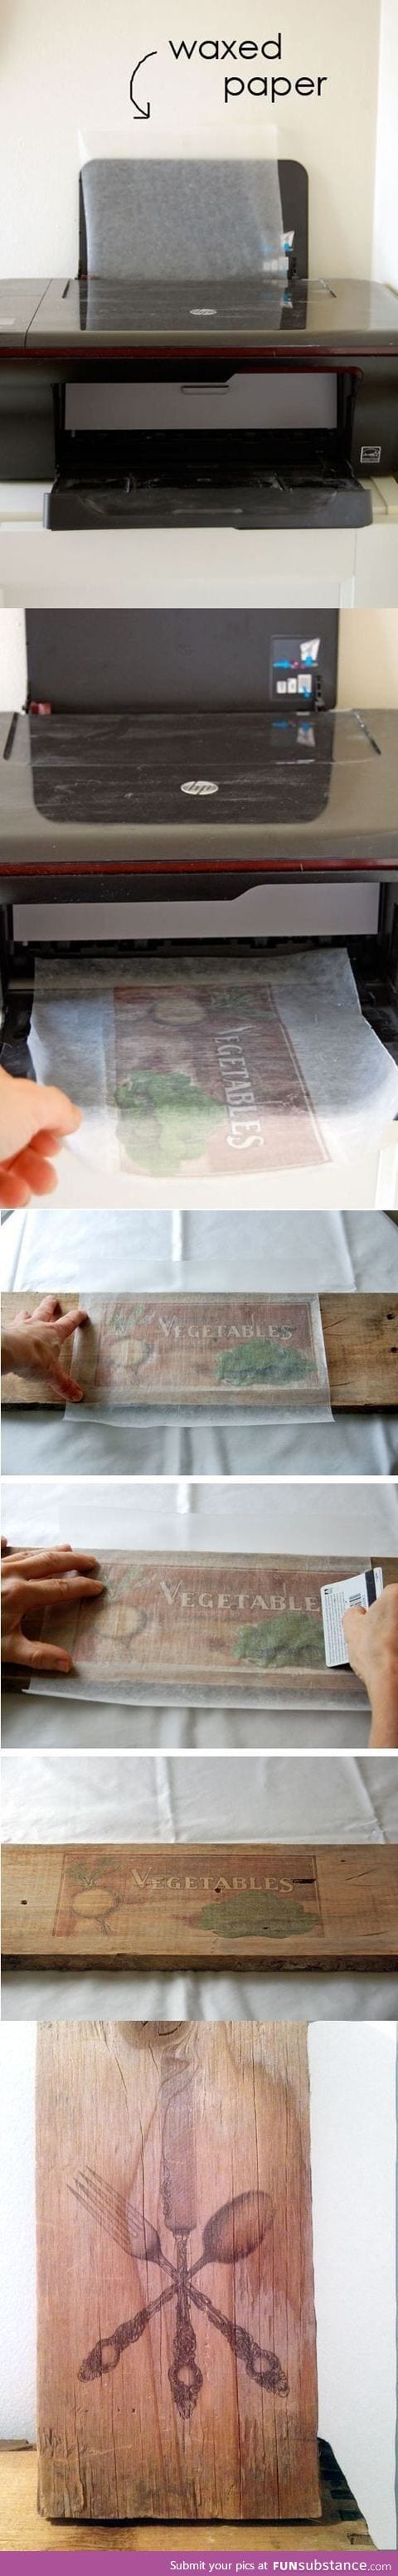 How to print images on wood with wax paper